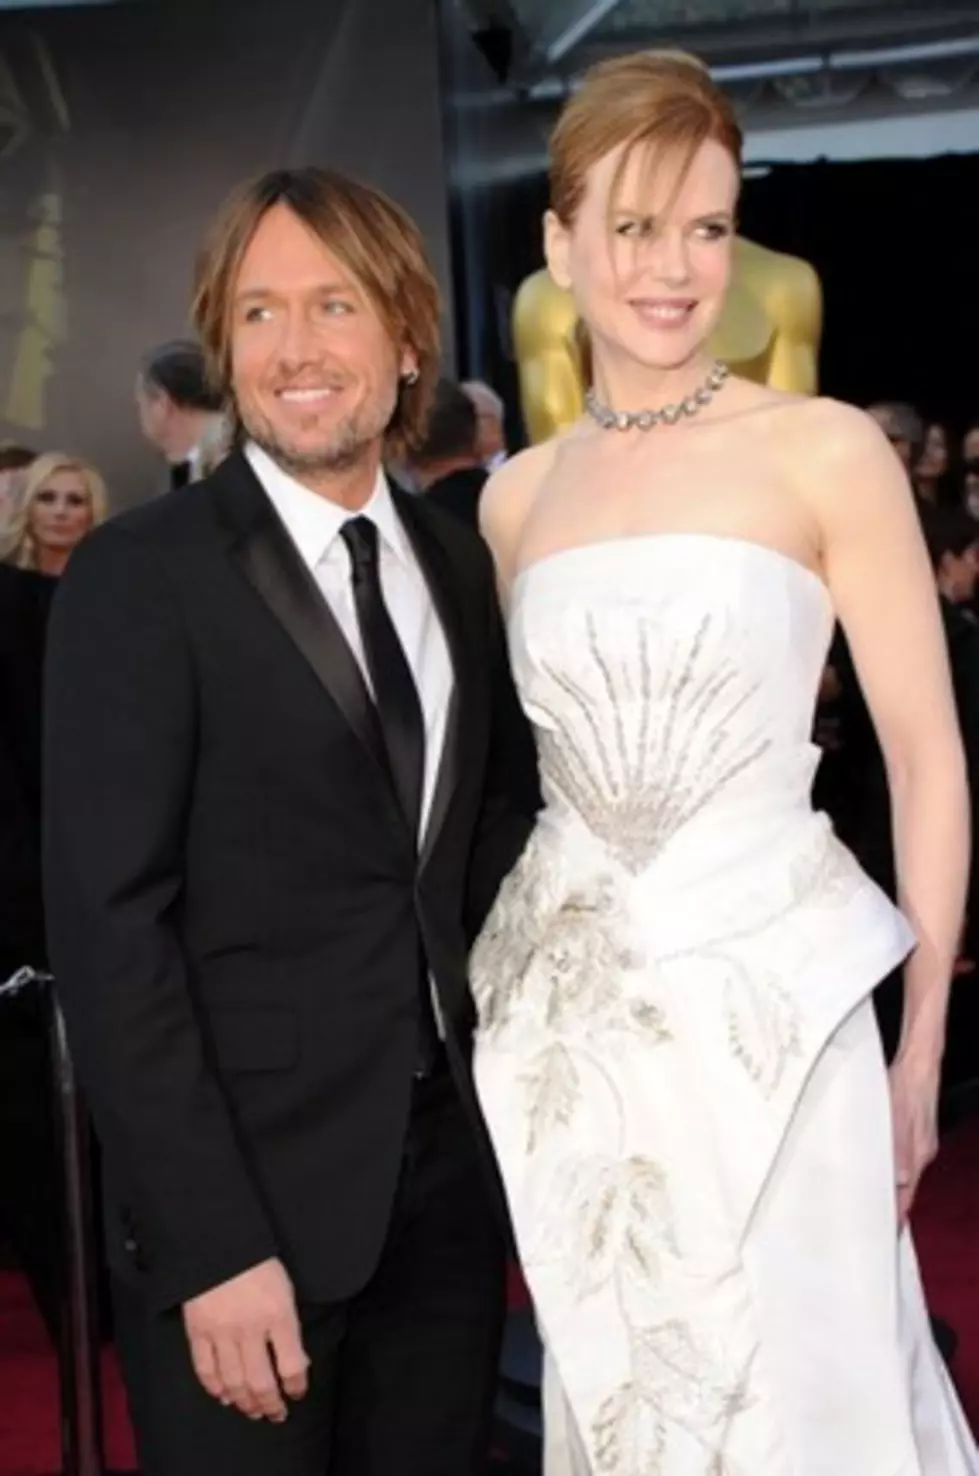 Academy Awards 2011: The Red Carpet Arrivals